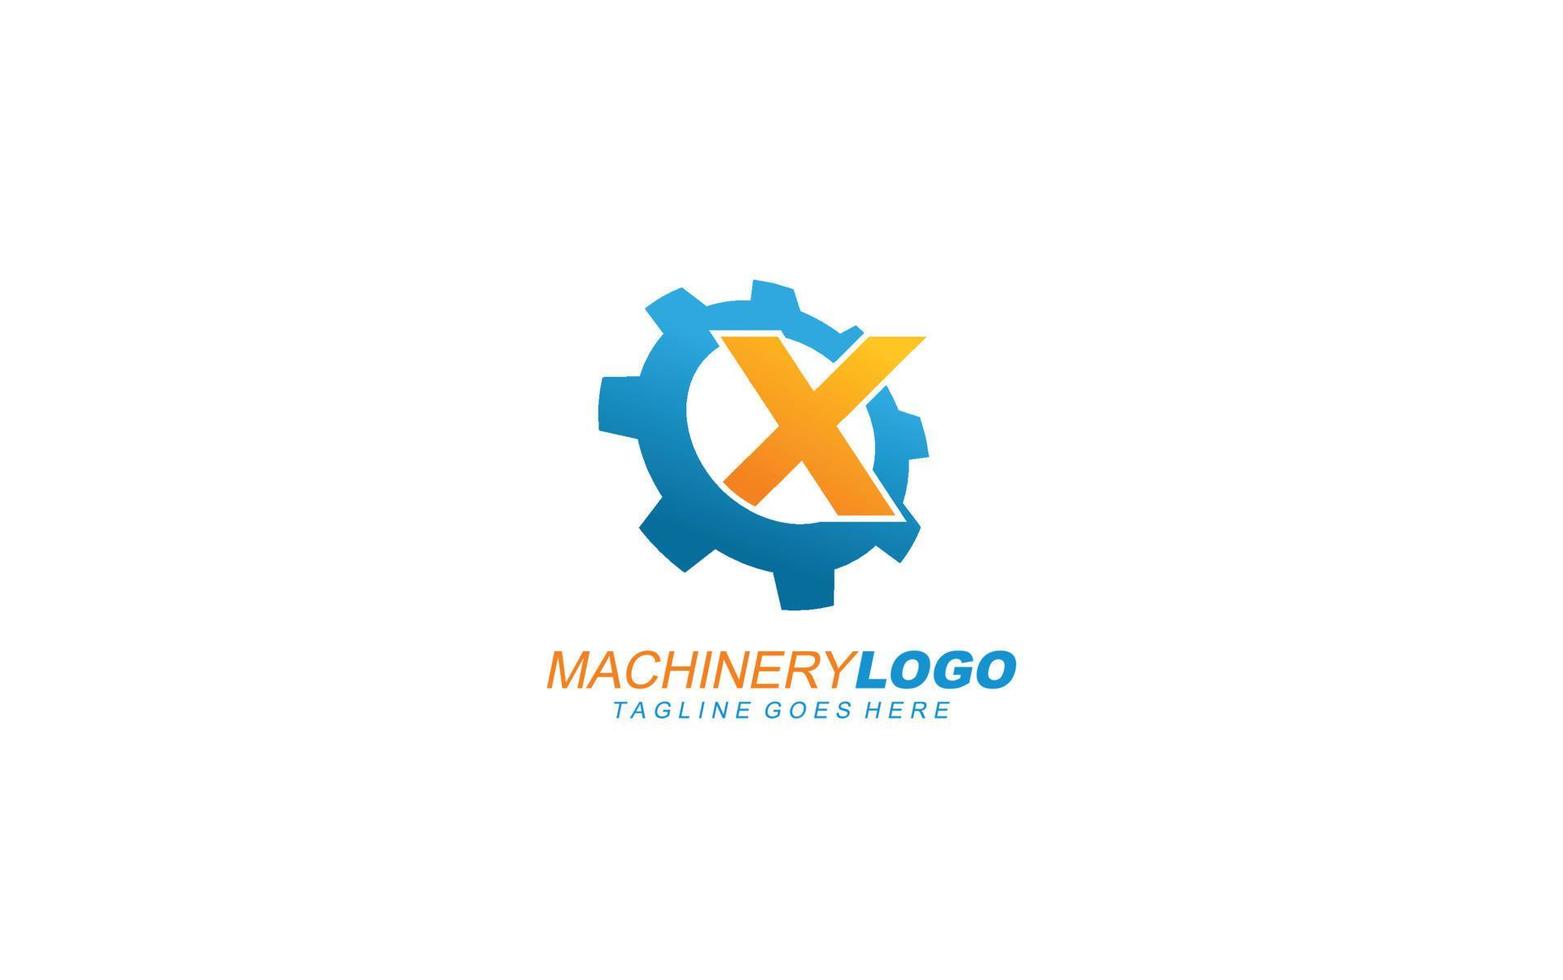 X logo gear for identity. industrial template vector illustration for your brand.